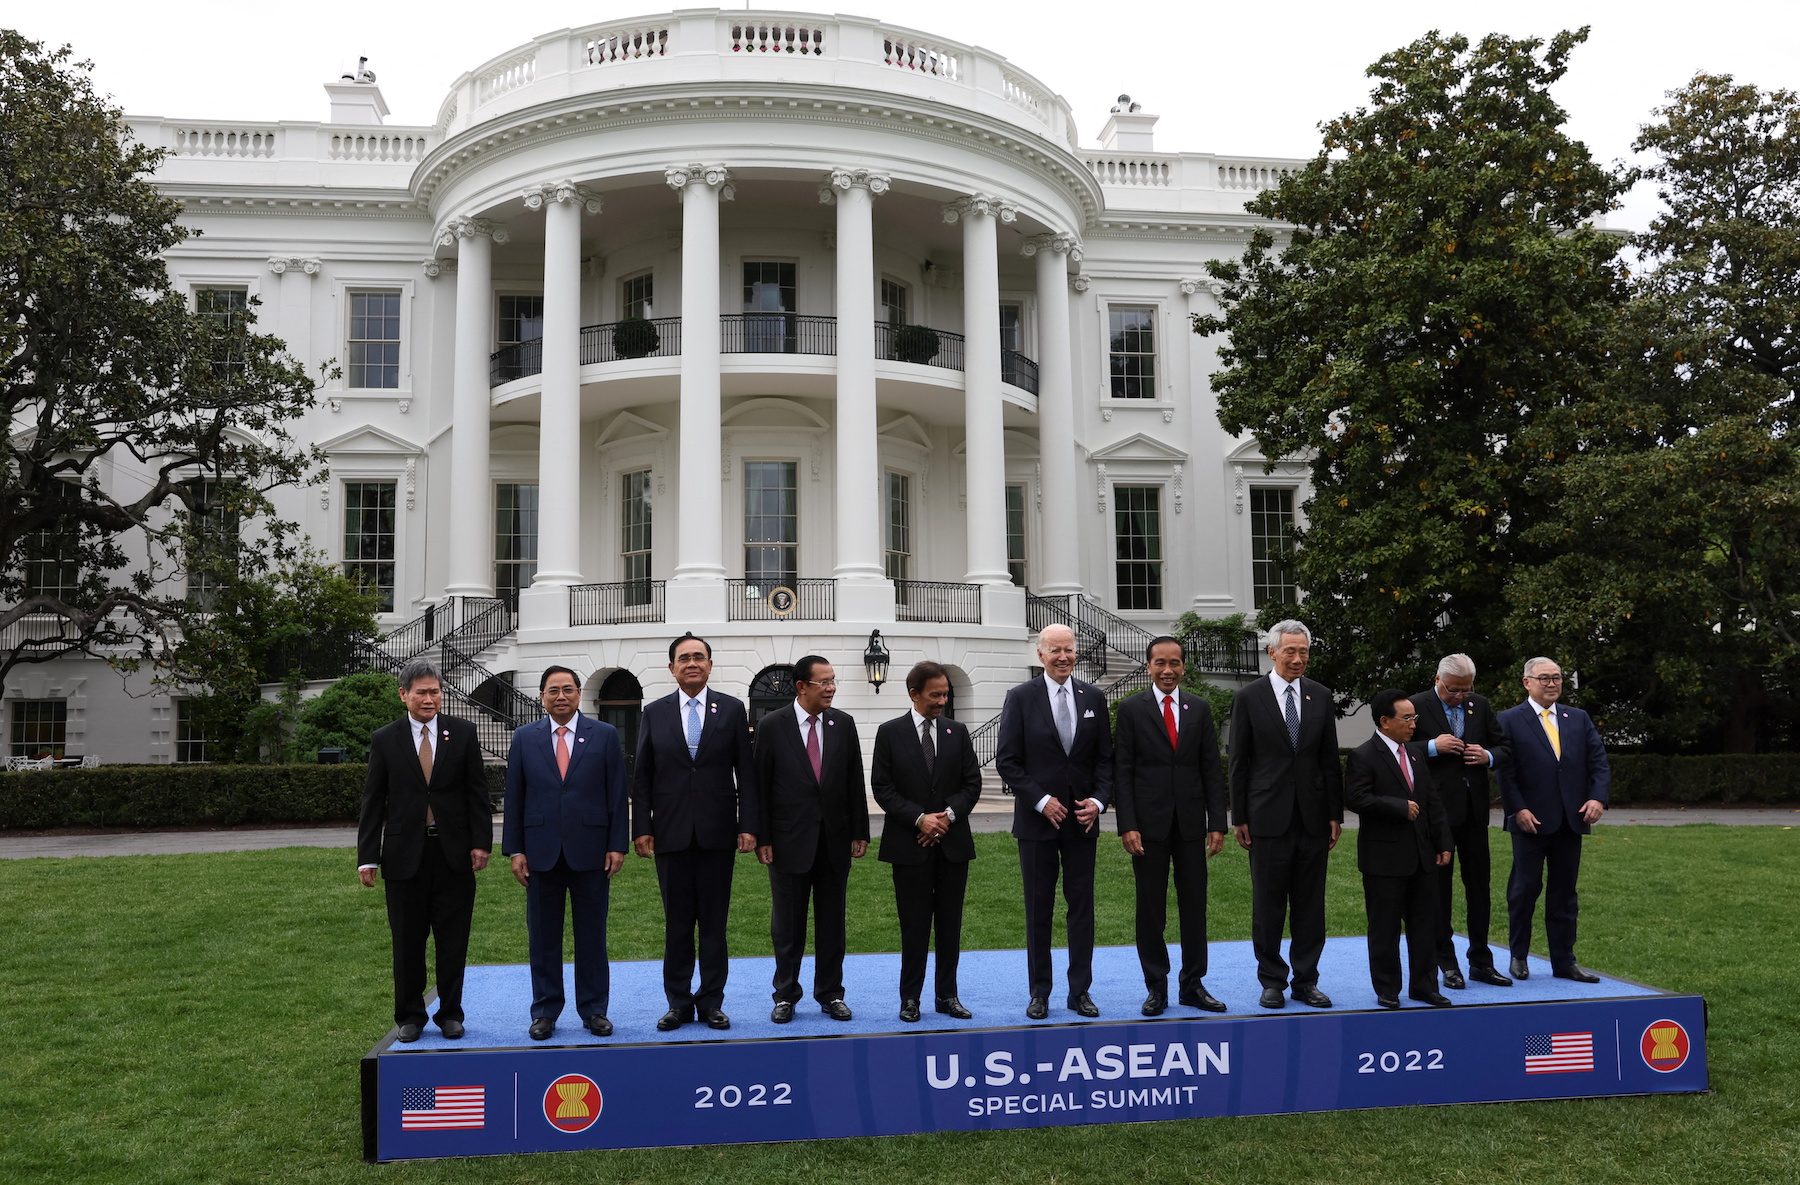 With China in focus, Biden makes $150 million commitment to ASEAN leaders